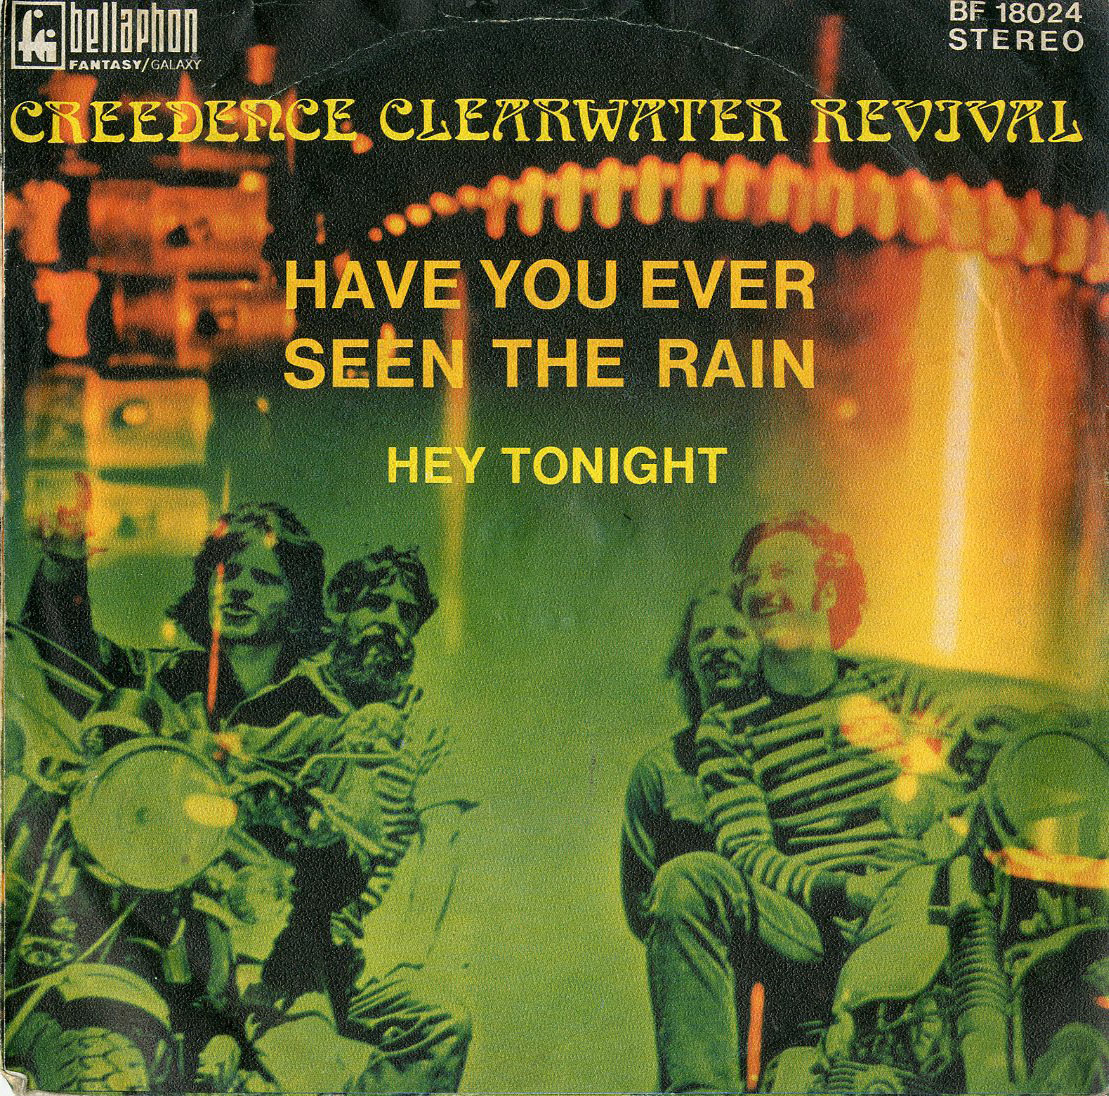 Albumcover Creedence Clearwater Revival - Have You Ever Seen The Rain / Hey Tonight